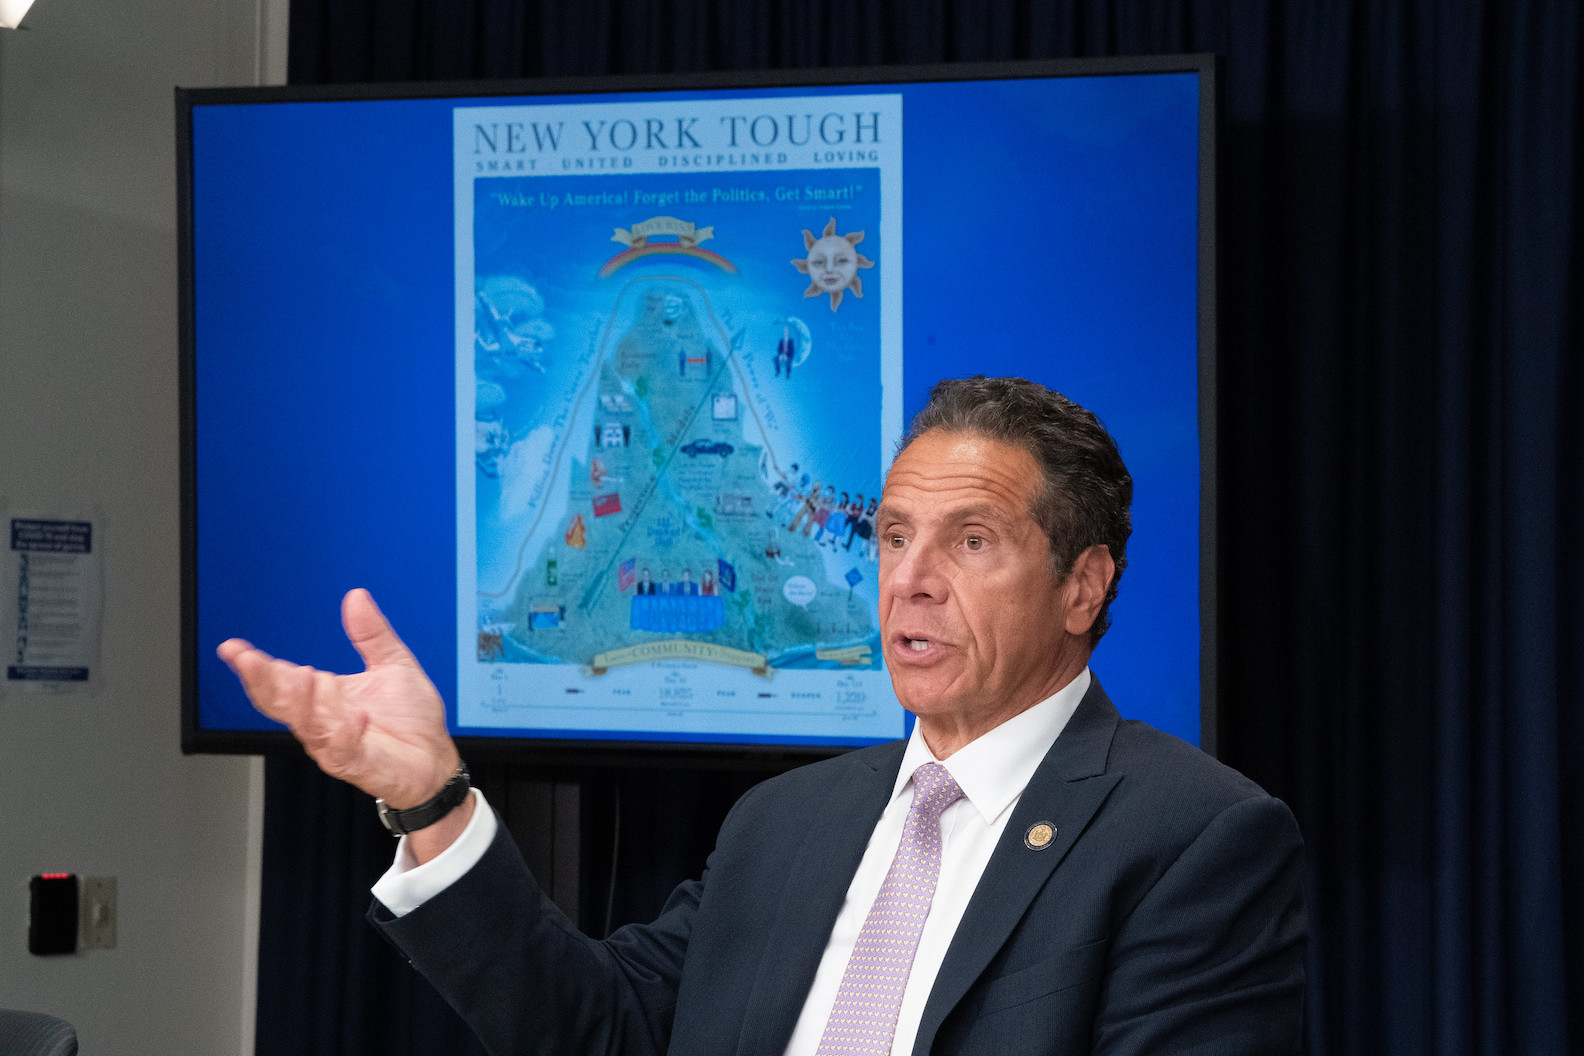 Gov. Andrew Cuomo addressed the media on Monday, issuing further guidance on how New York schools can reopen in the fall. (All images courtesy of the Office of Gov. Andrew M. Cuomo)